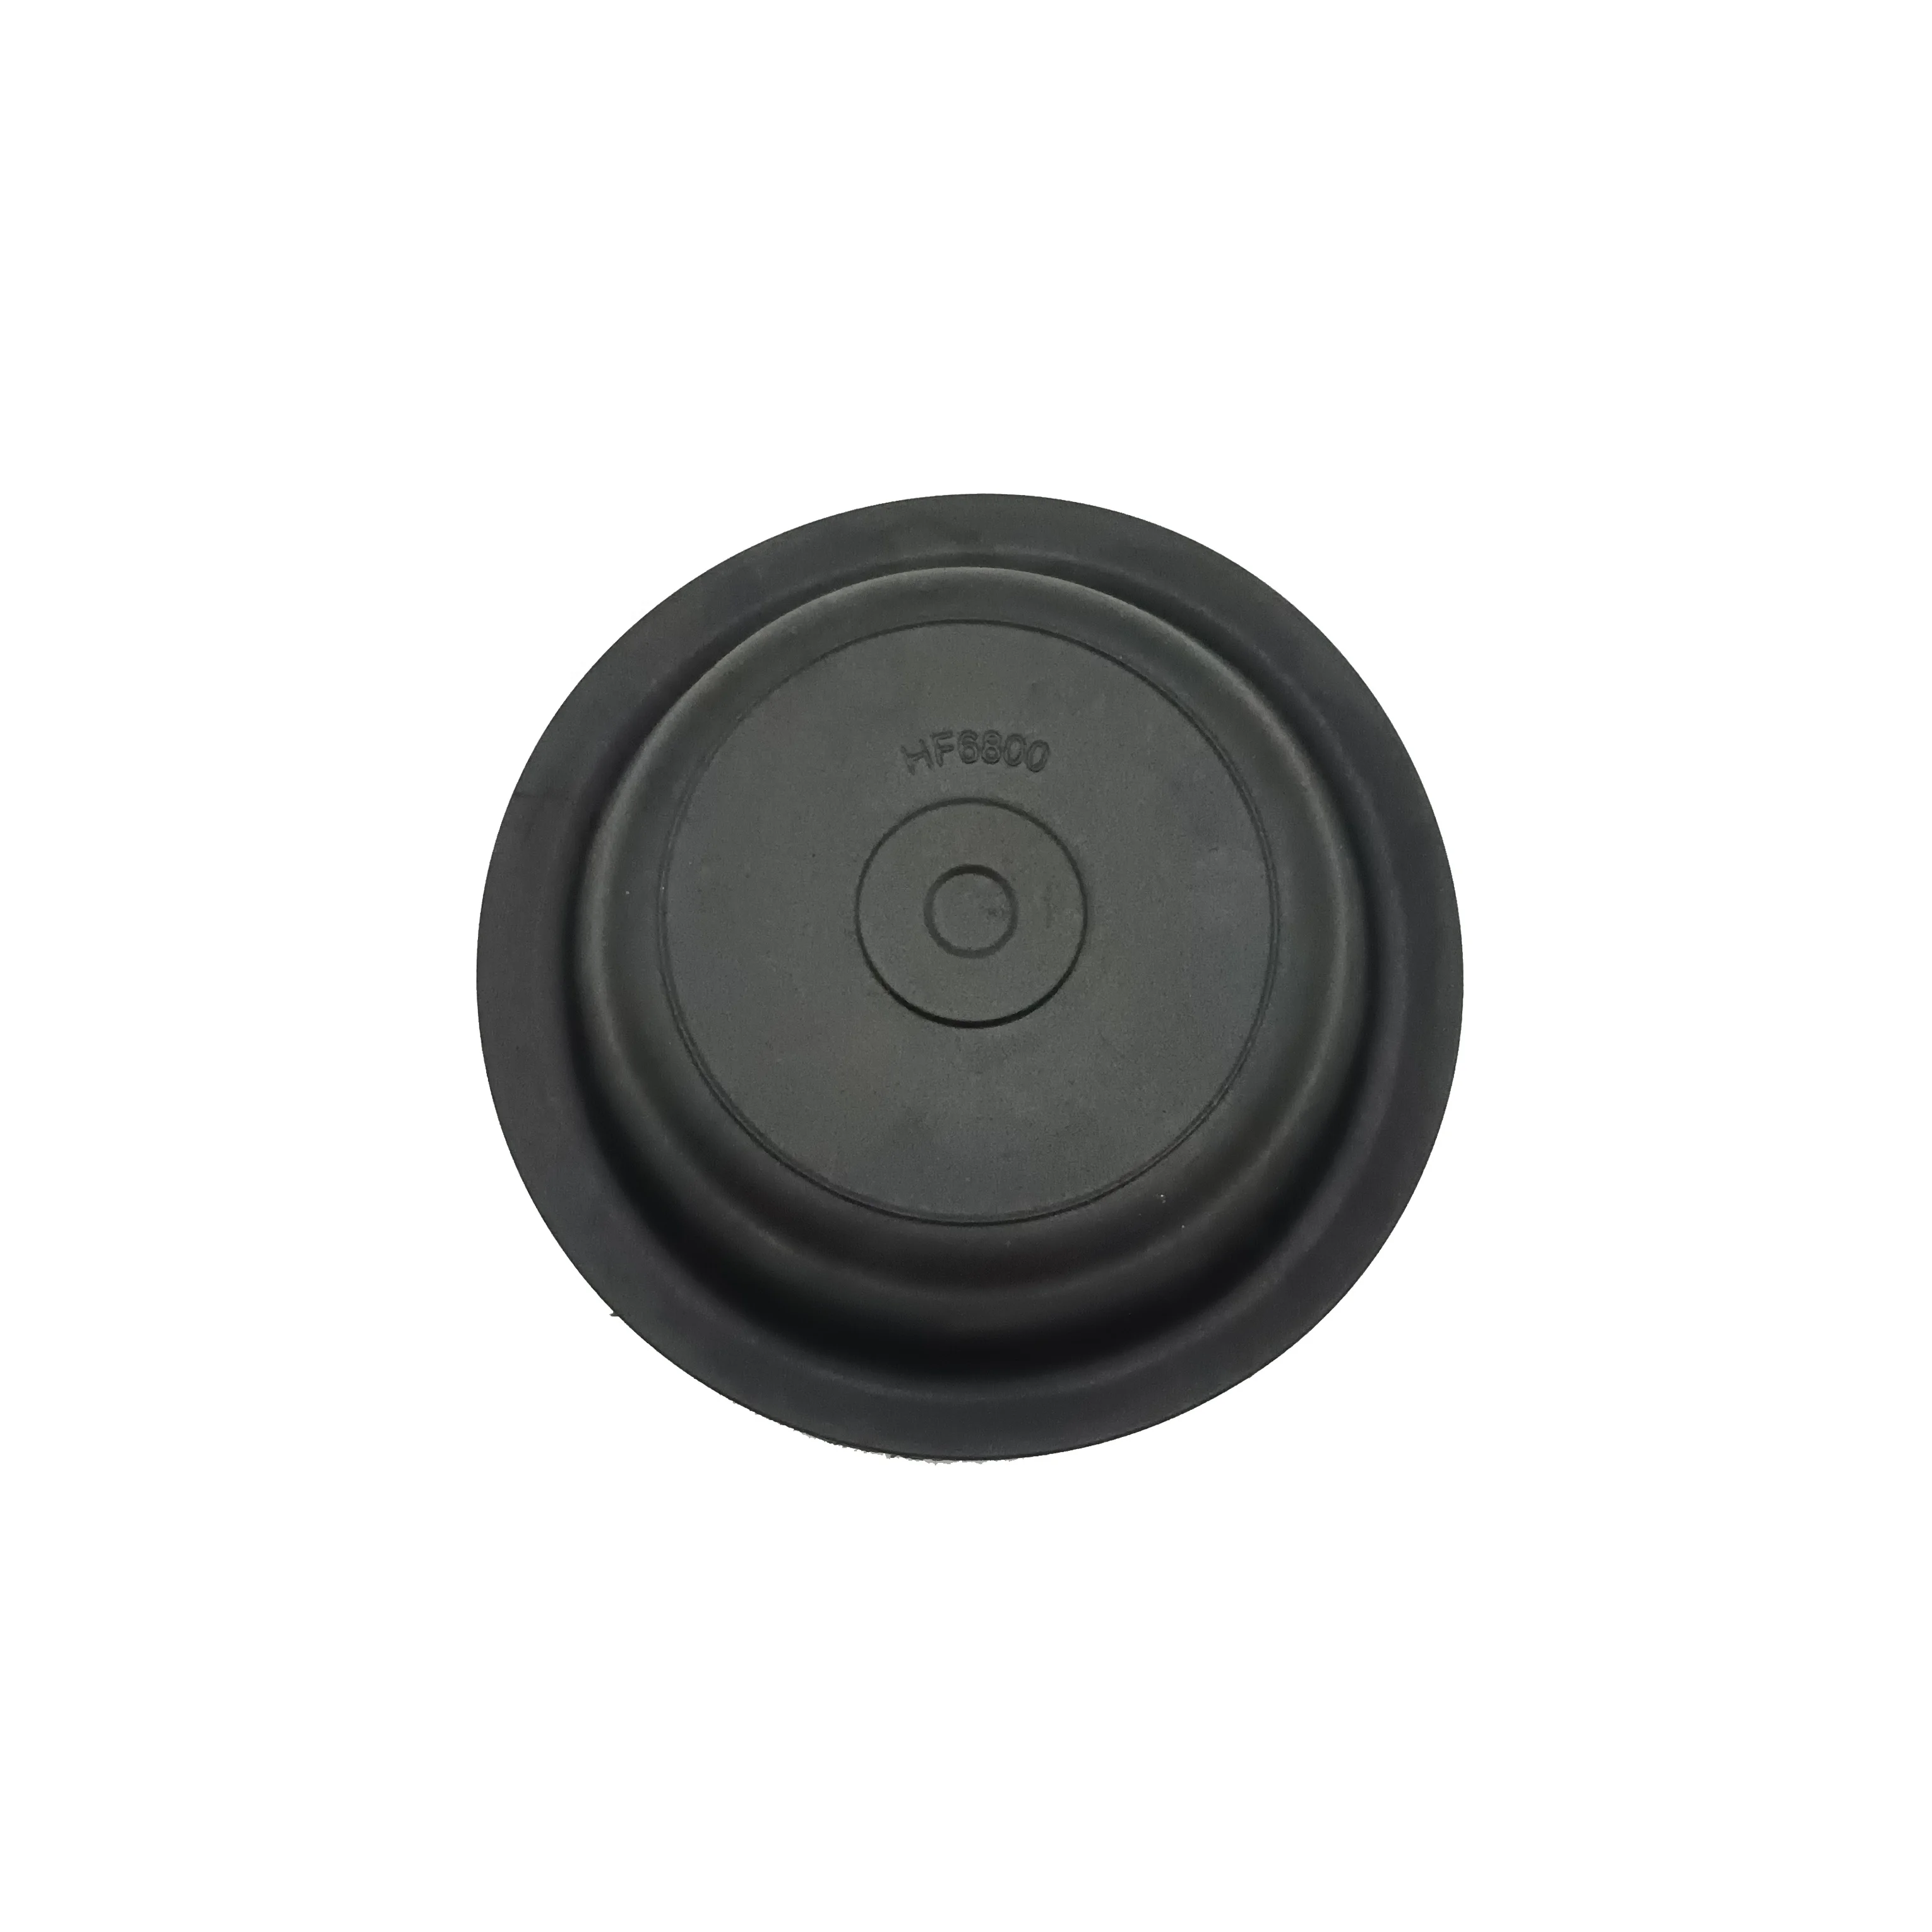 Hot selling HF6800 high quality auto accessories brake air chamber diaphragm rubber brake cup seal (1600622620957)